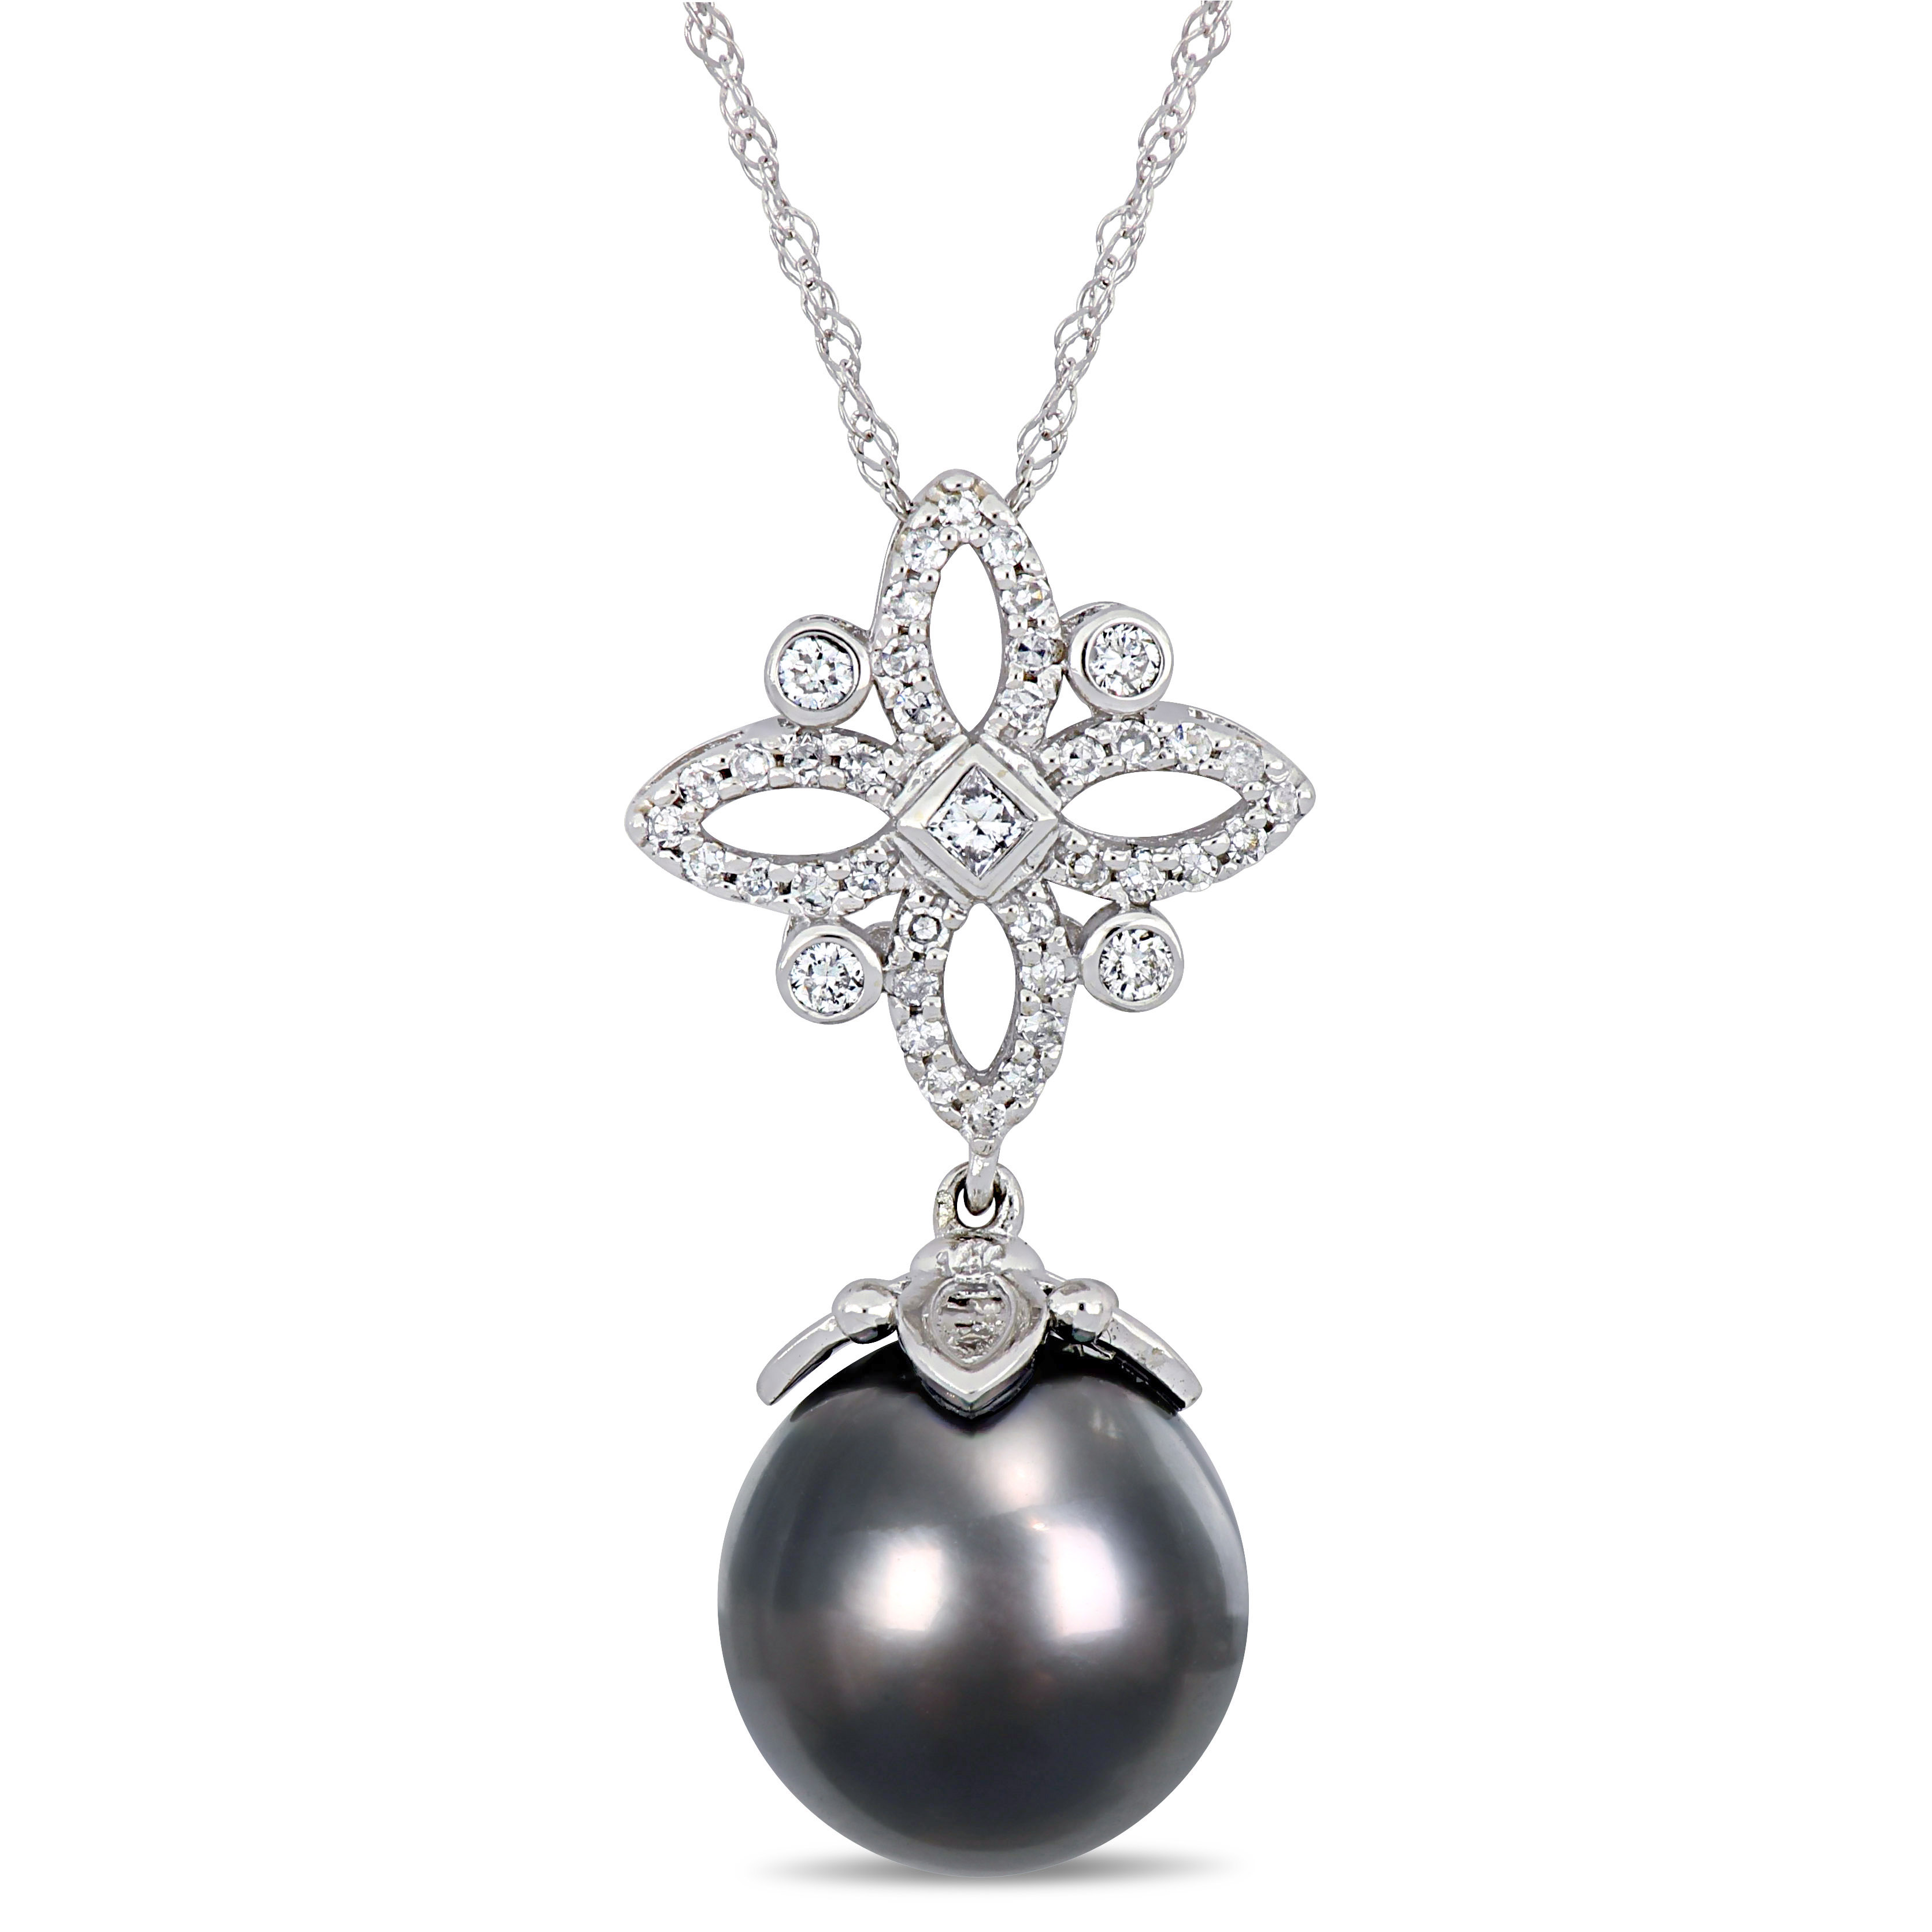 11-12 MM Black Tahitian Cultured Pearl and 1/4 CT TW Diamond Four-Point Star Drop Necklace in 14k White Gold